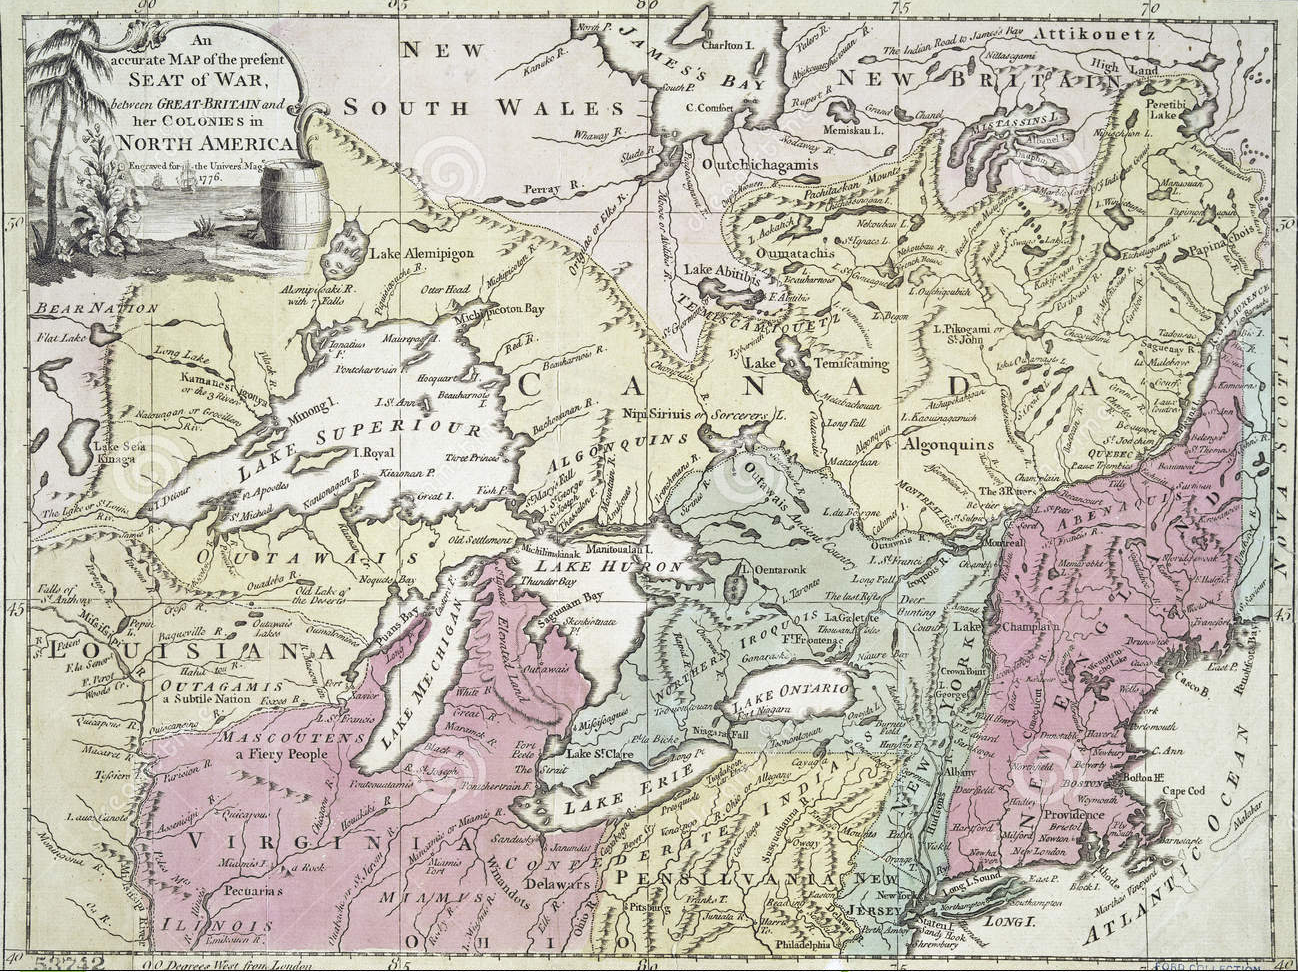 There were other colonies besides the thirteen, as shown in this 1776 map.